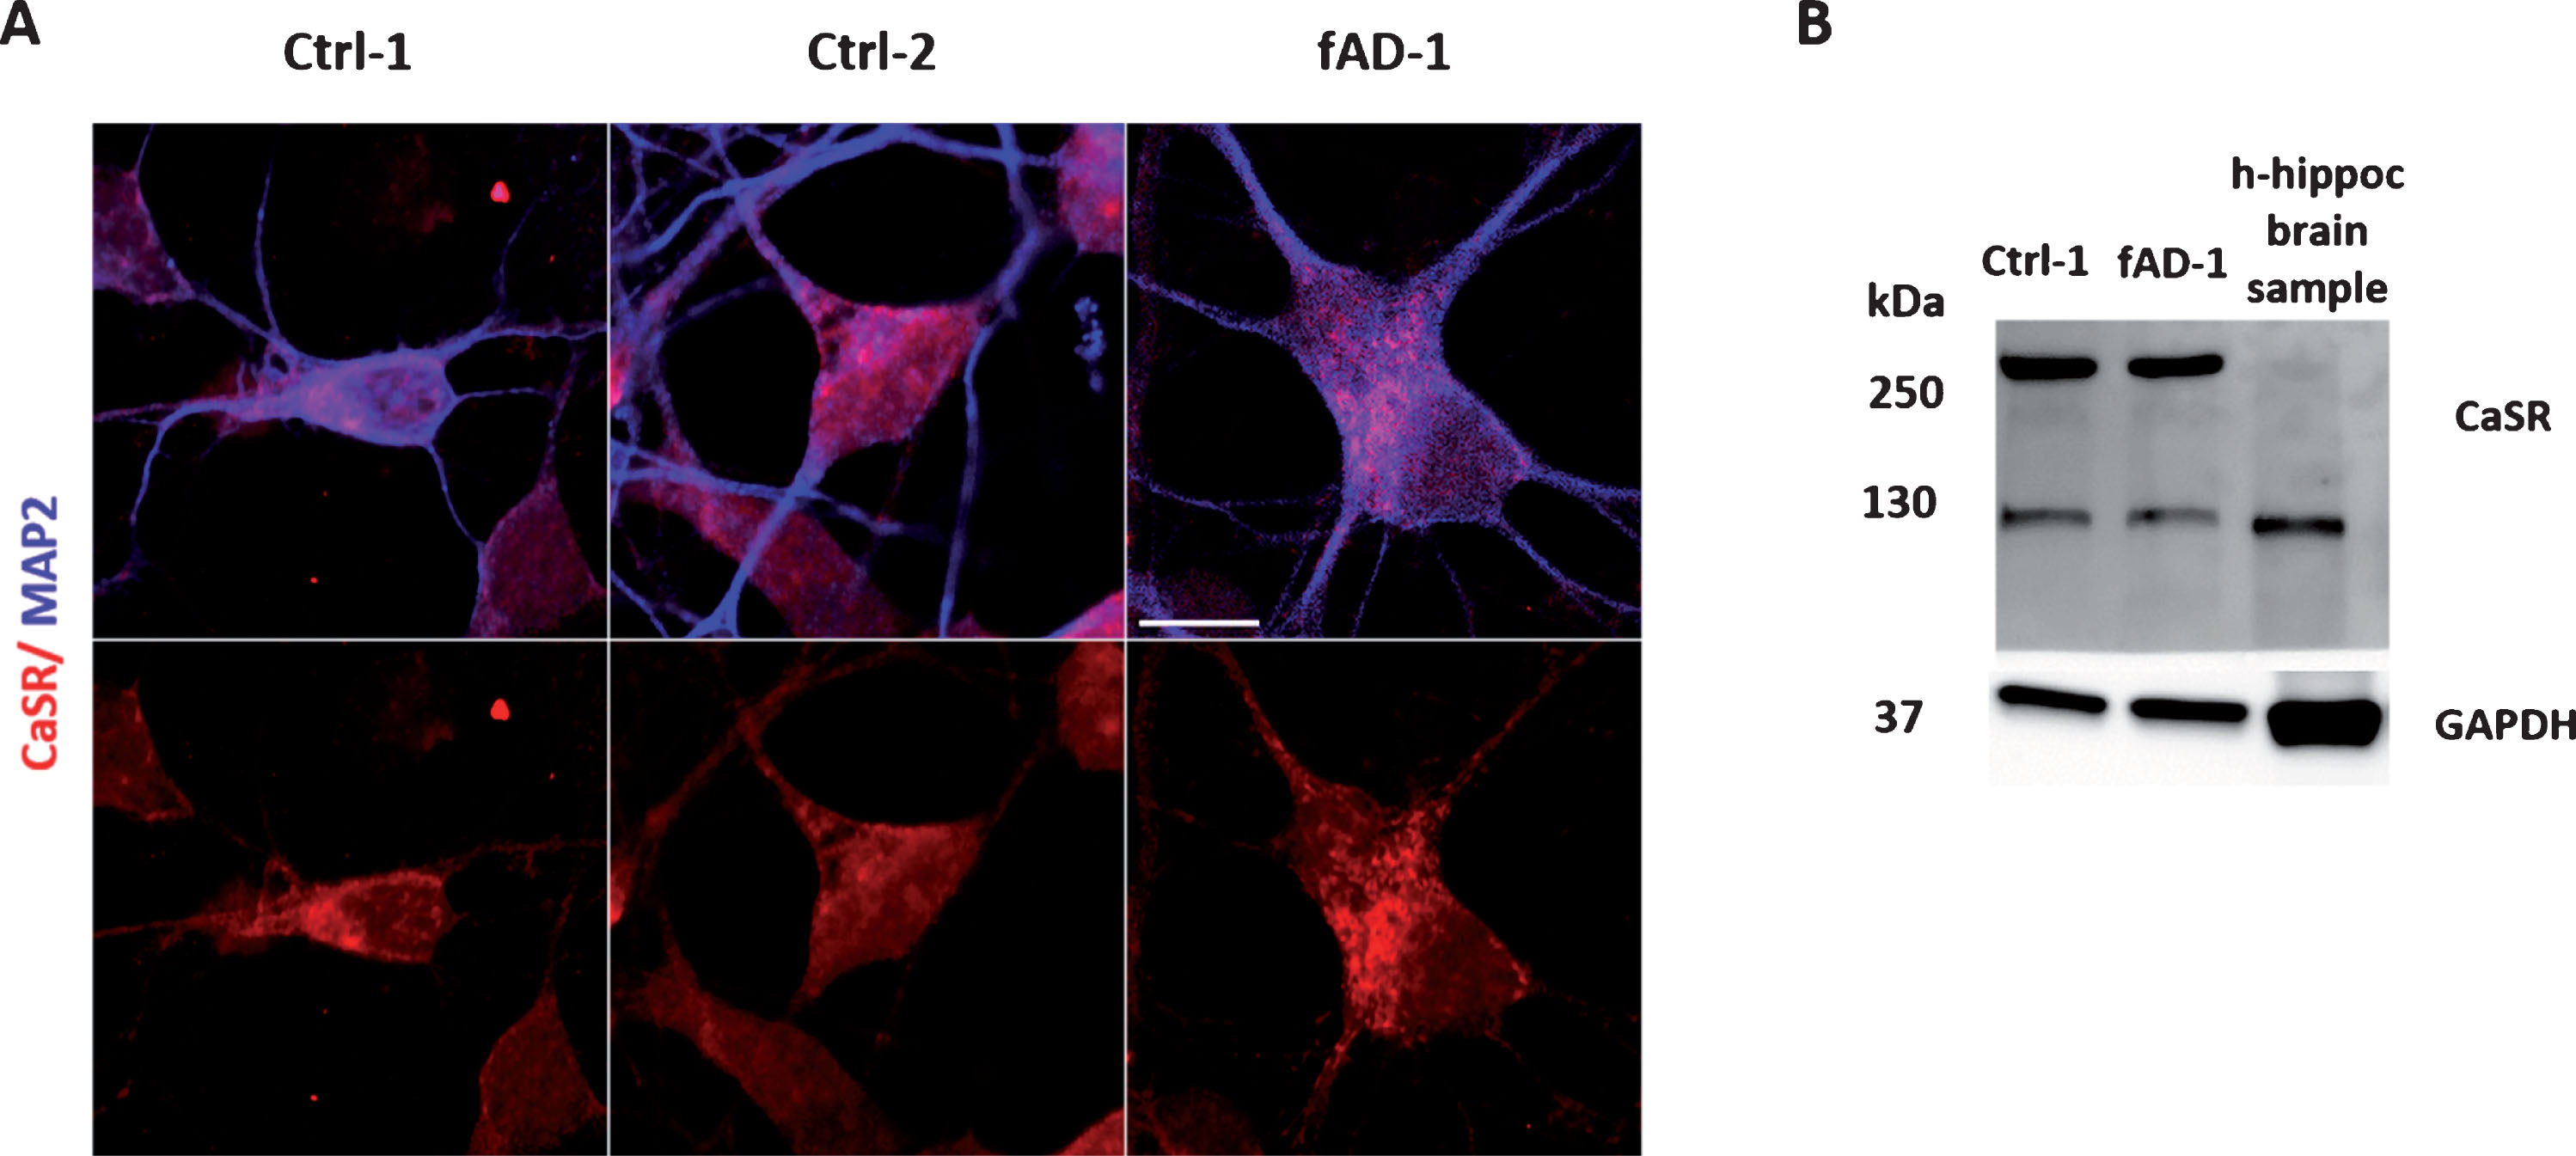 CaSR expression in differentiated neuronal cultures. A) Immunocytochemical analysis showing the CaSR expression (in red) in neurons, co-stained with MAP2 (in blue); for color images see the online version. B) Representative western blot of control and fAD lysates demonstrating the receptor positive bands at ∼130 kDa and ∼260 kDa which should represent the monomeric and dimeric forms of CaSR. Human control adult hippocampal brain lysate has been loaded as positive control of CaSR expression in human brain.